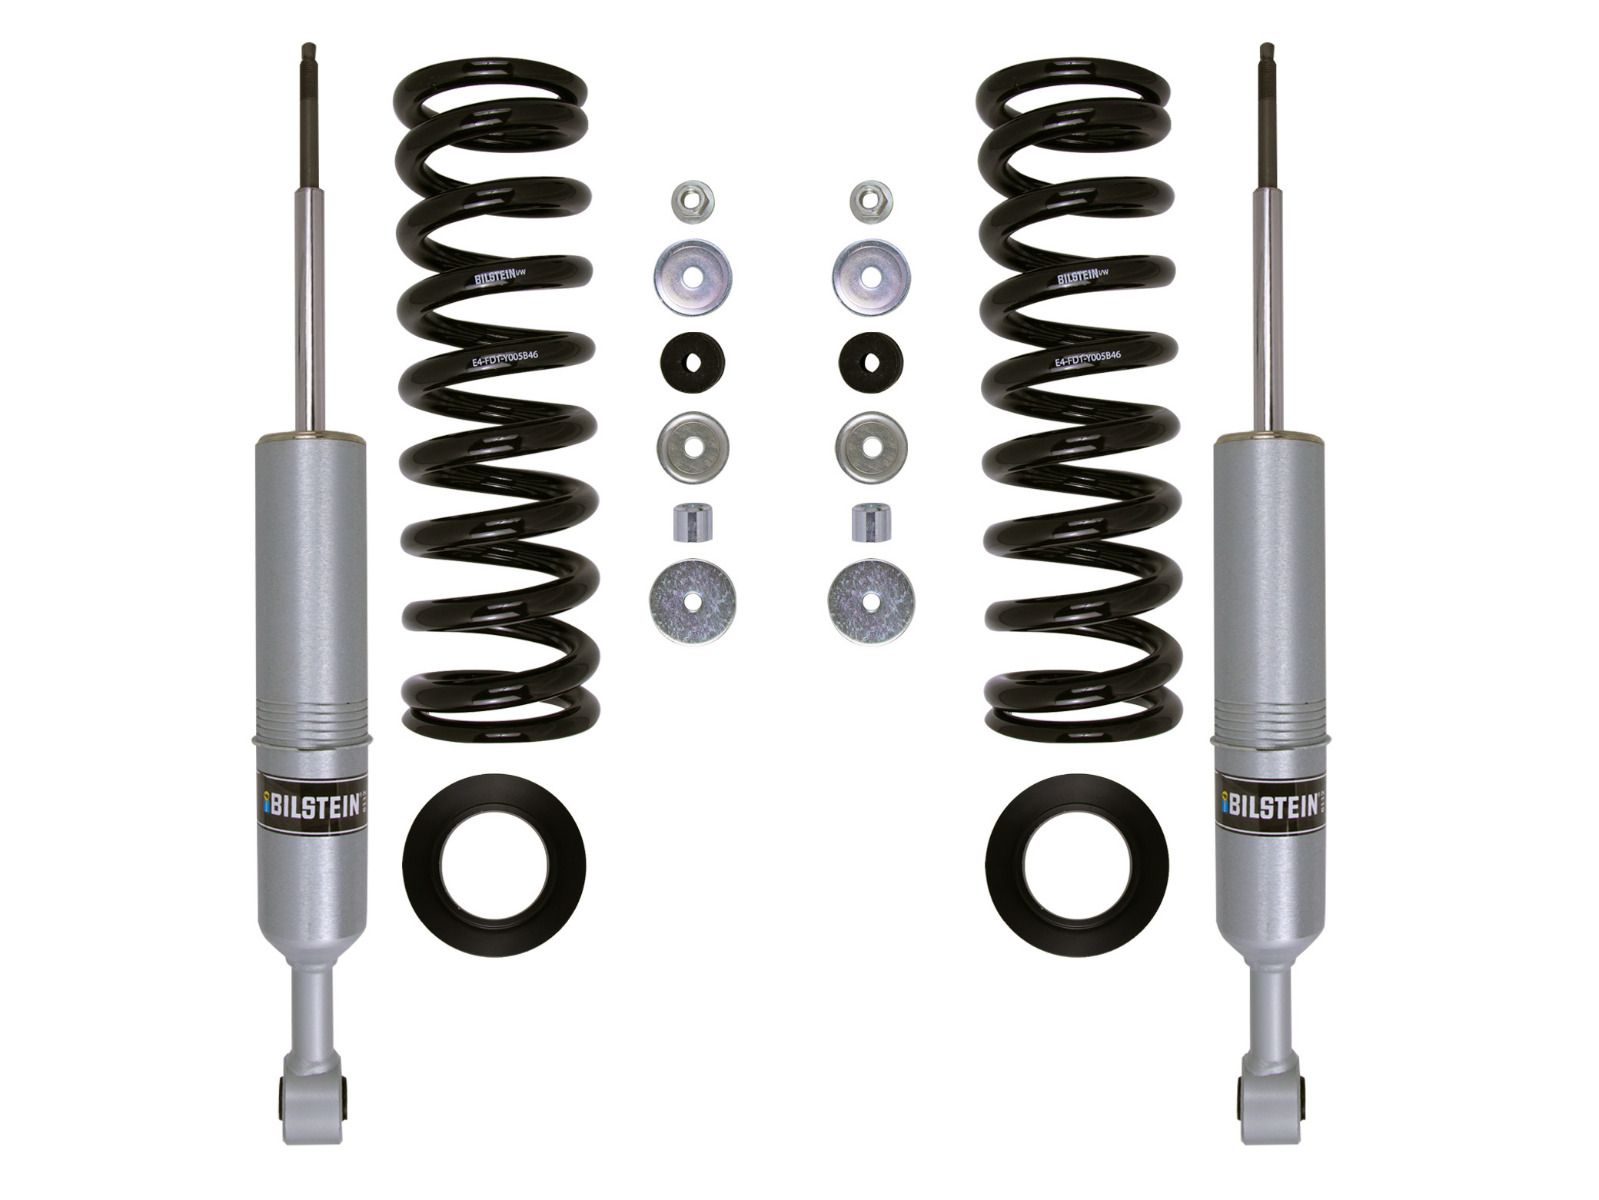 FJ Cruiser 2010-2014 Toyota 4wd - Bilstein Front 6112 Series Coil-Over Kit (Adjustable Height 1.5"-3.2" Front Lift, for additional 150-200 lbs of front weight)